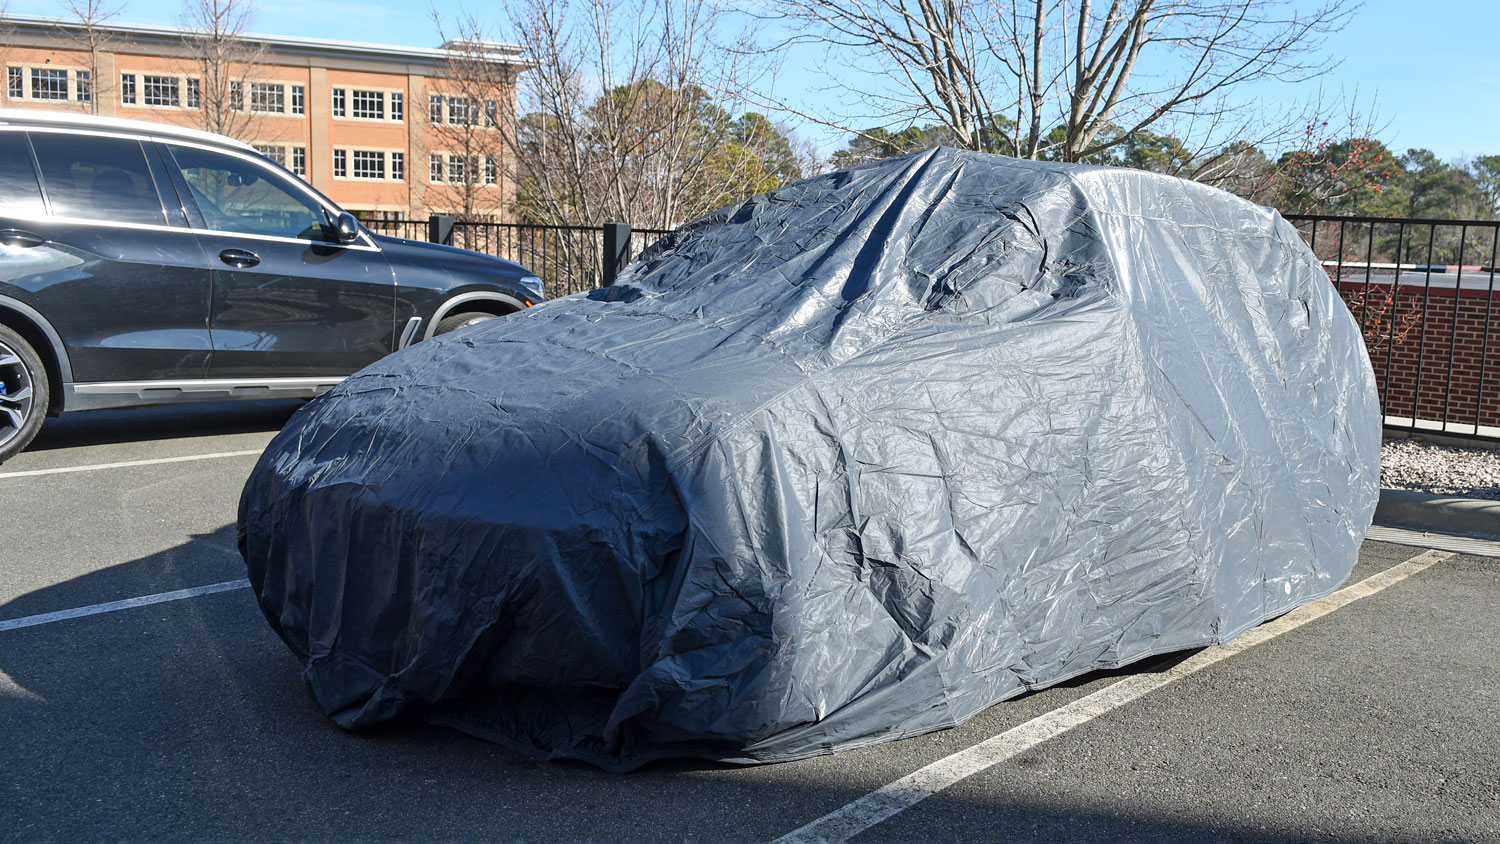 The OxGord Executive Storm-Proof car cover installed on a testing vehicle.